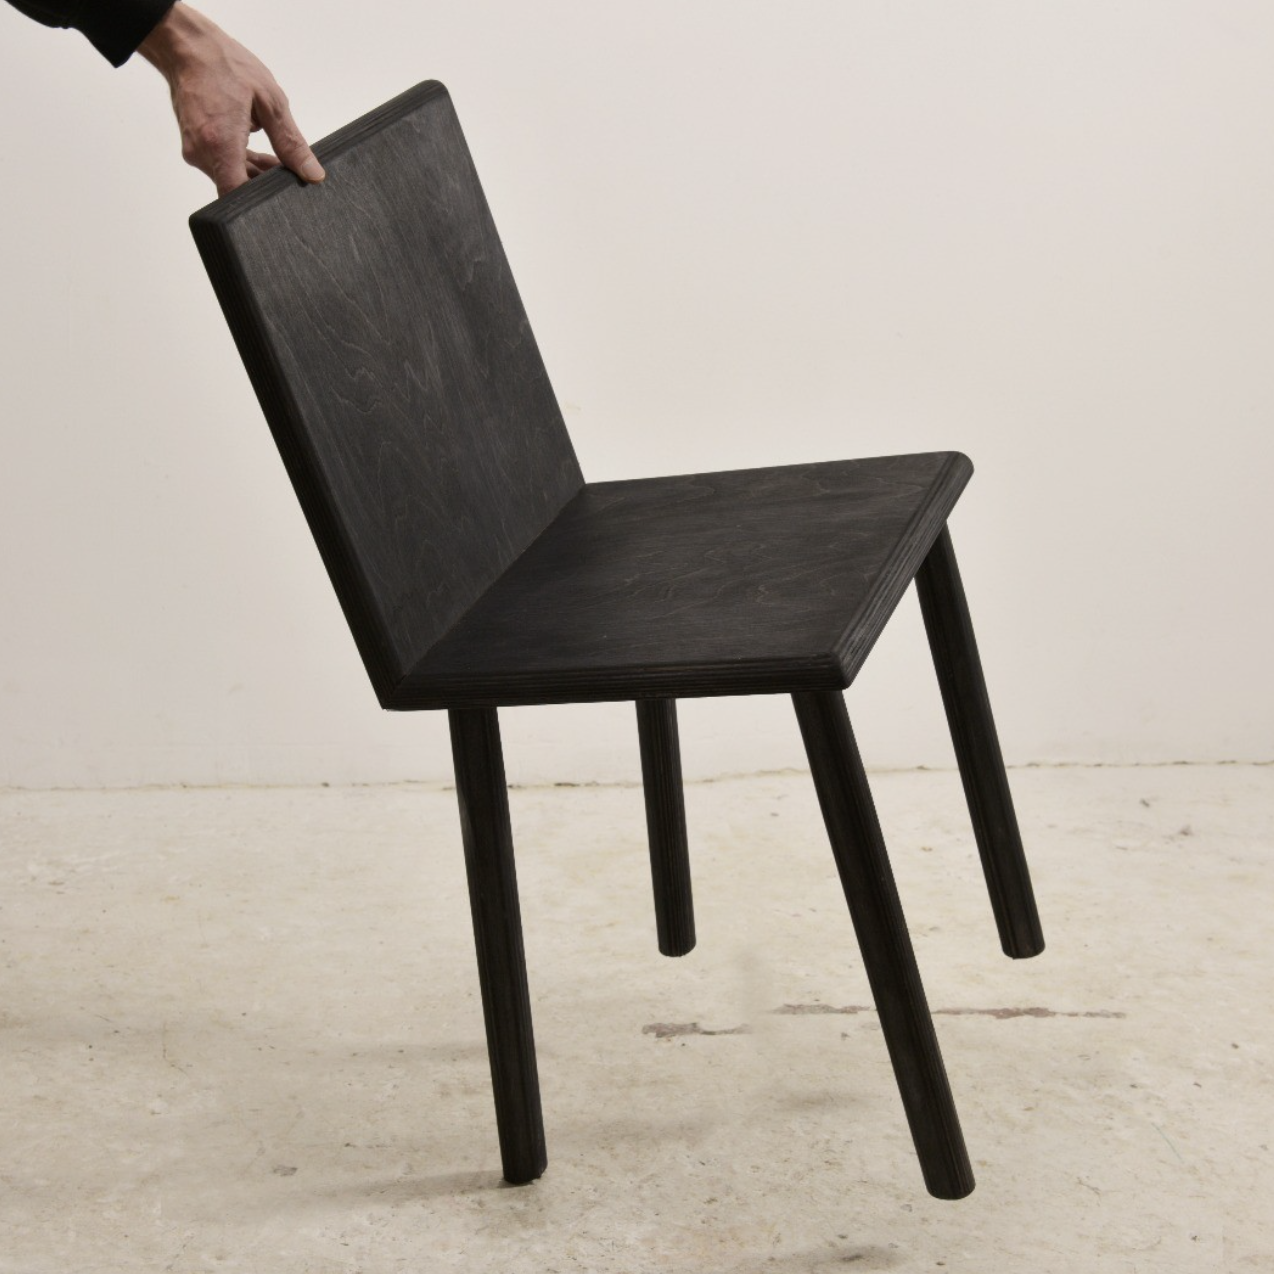 Make and Reuse Creative Workshops: ReeSort chair by StorqueStudios made of reclaimed materials